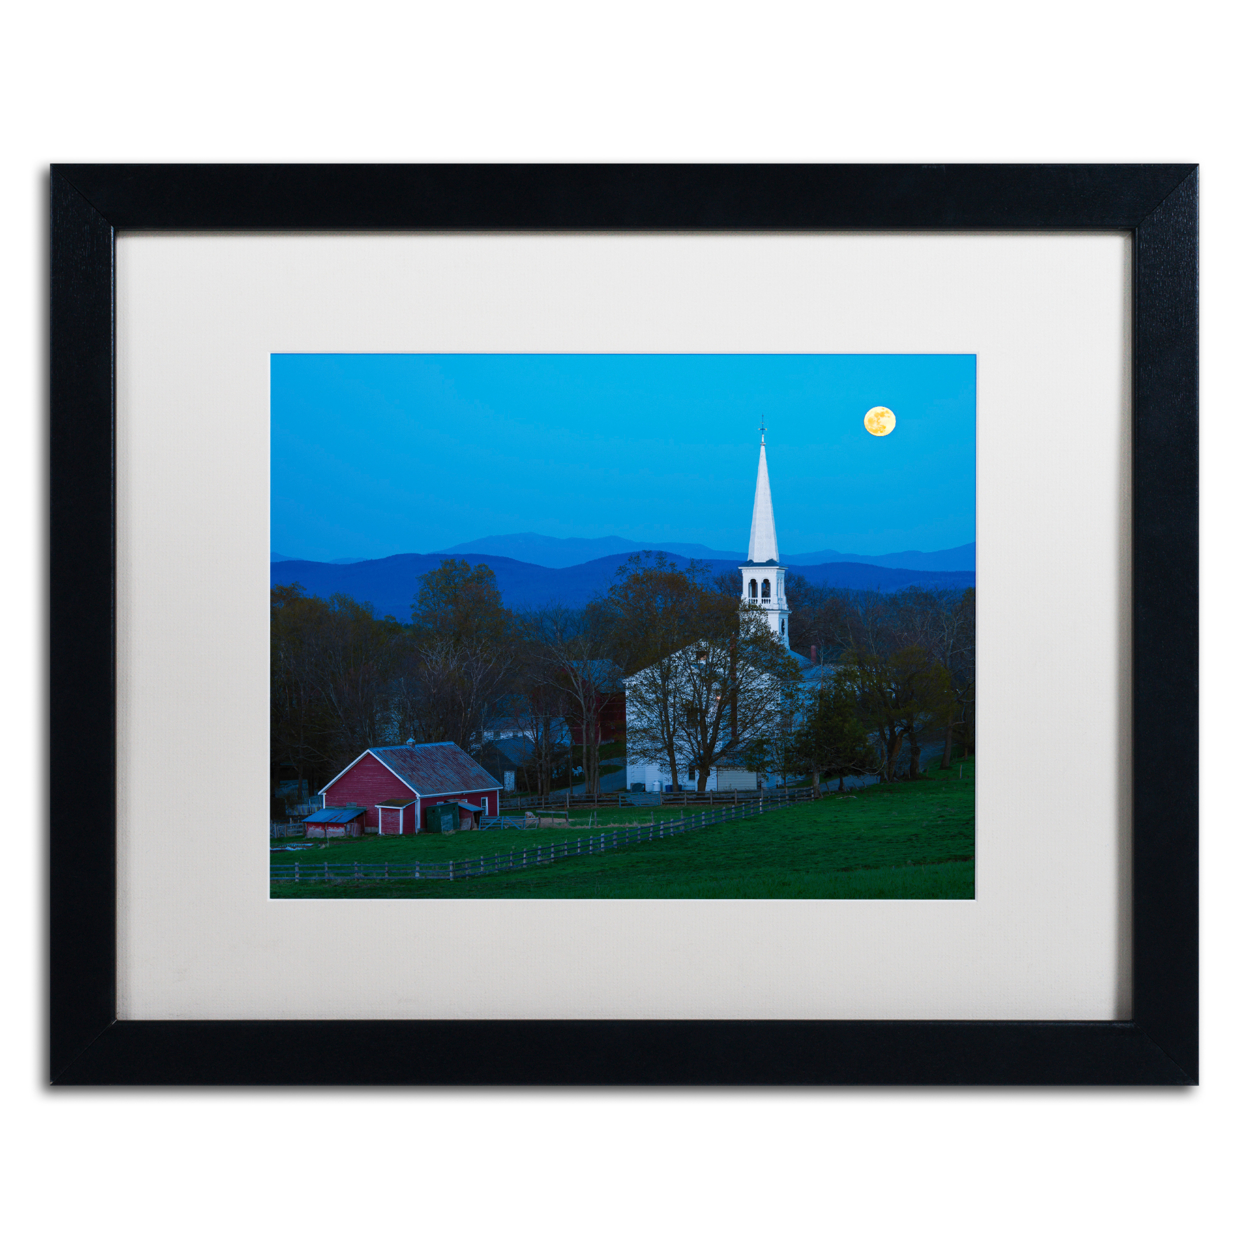 Michael Blanchette Photography 'Moonrise At Peacham' Black Wooden Framed Art 18 X 22 Inches